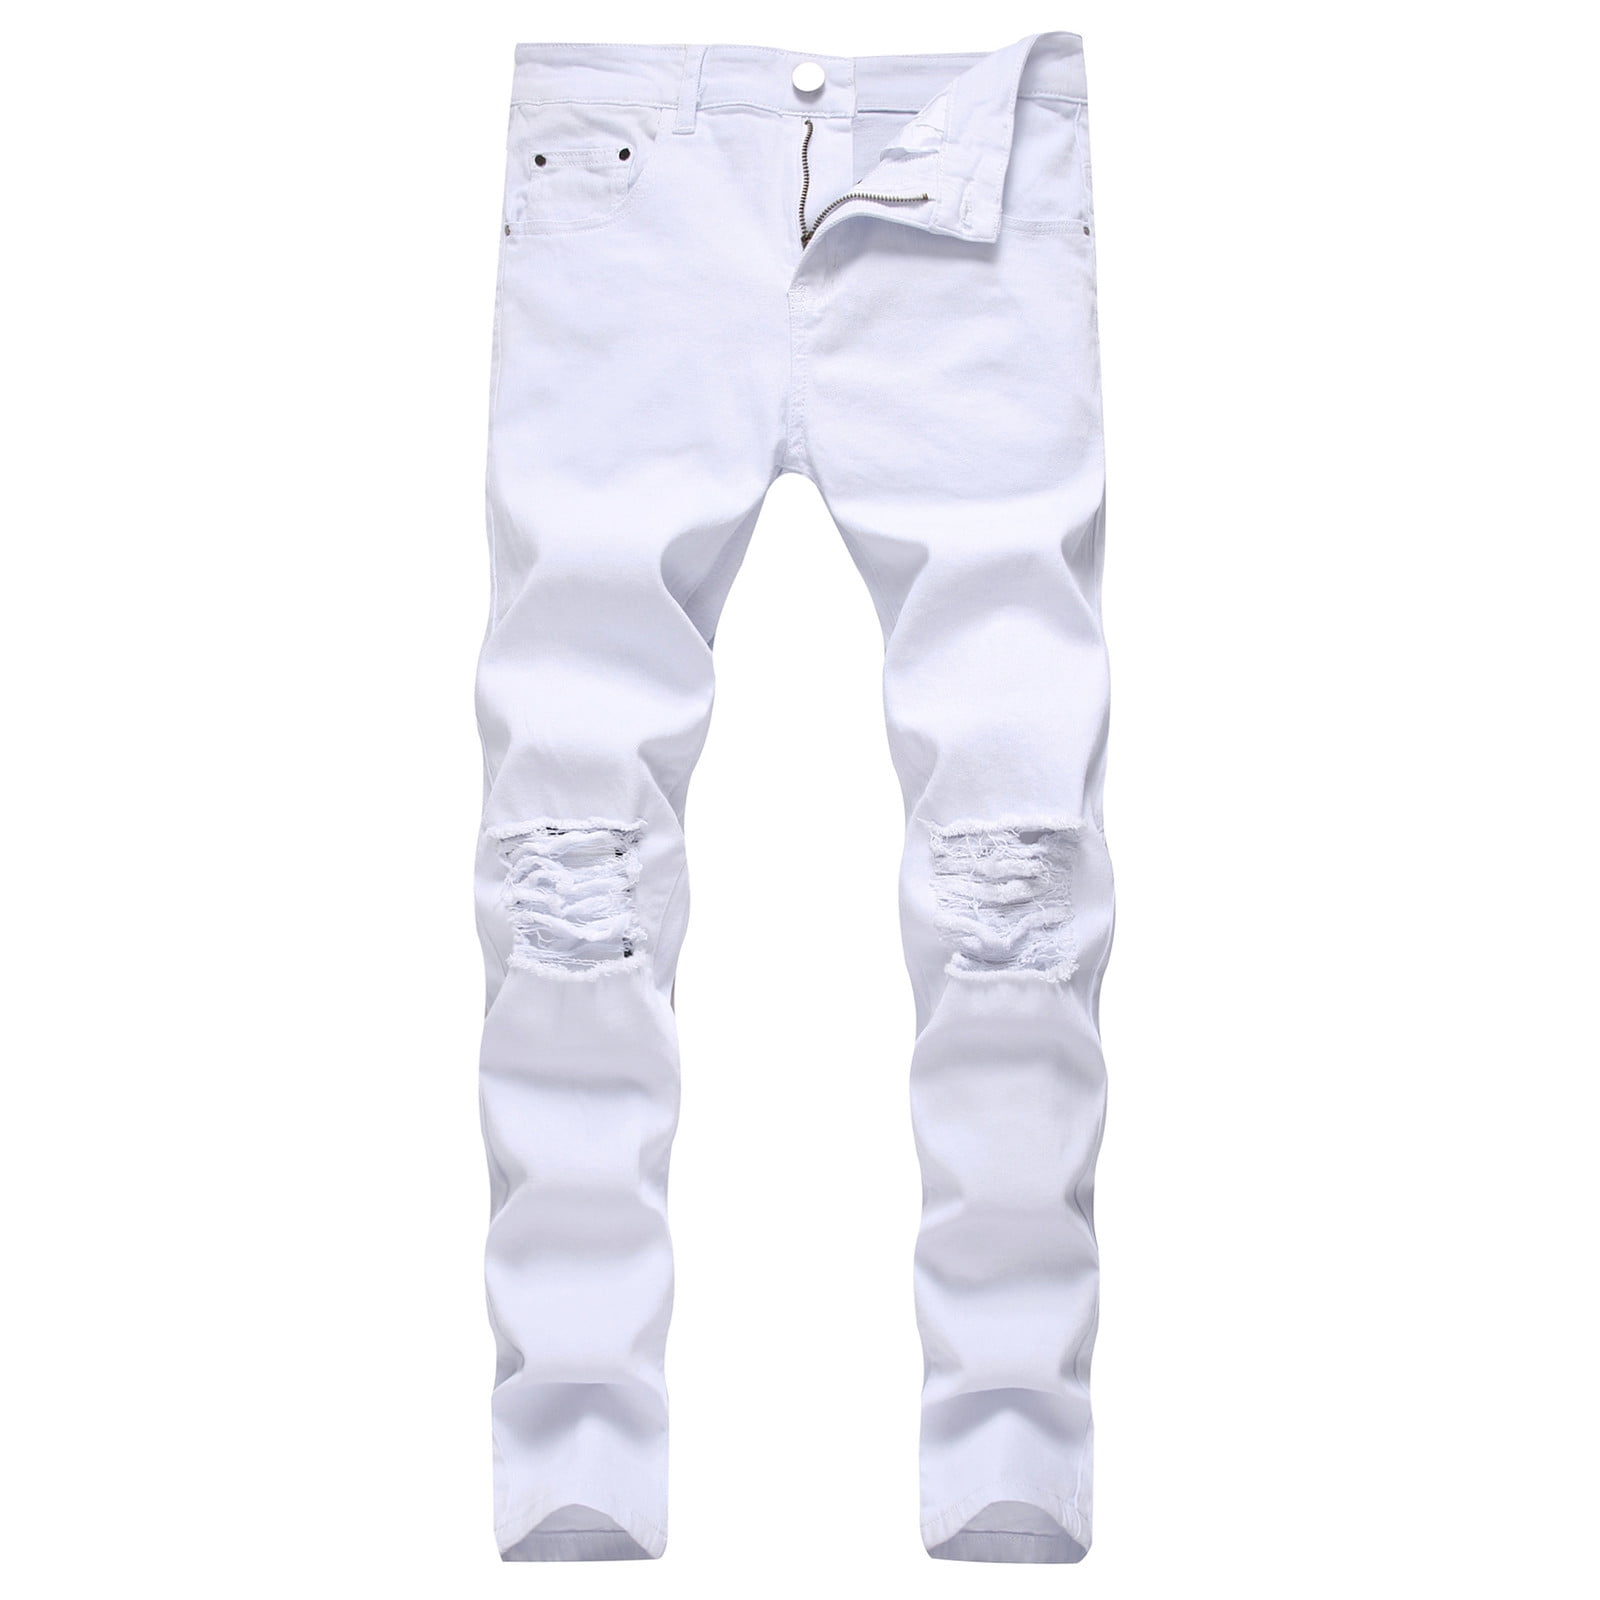 Men's Ripped and Distressed Jeans | Explore our New Arrivals | ZARA